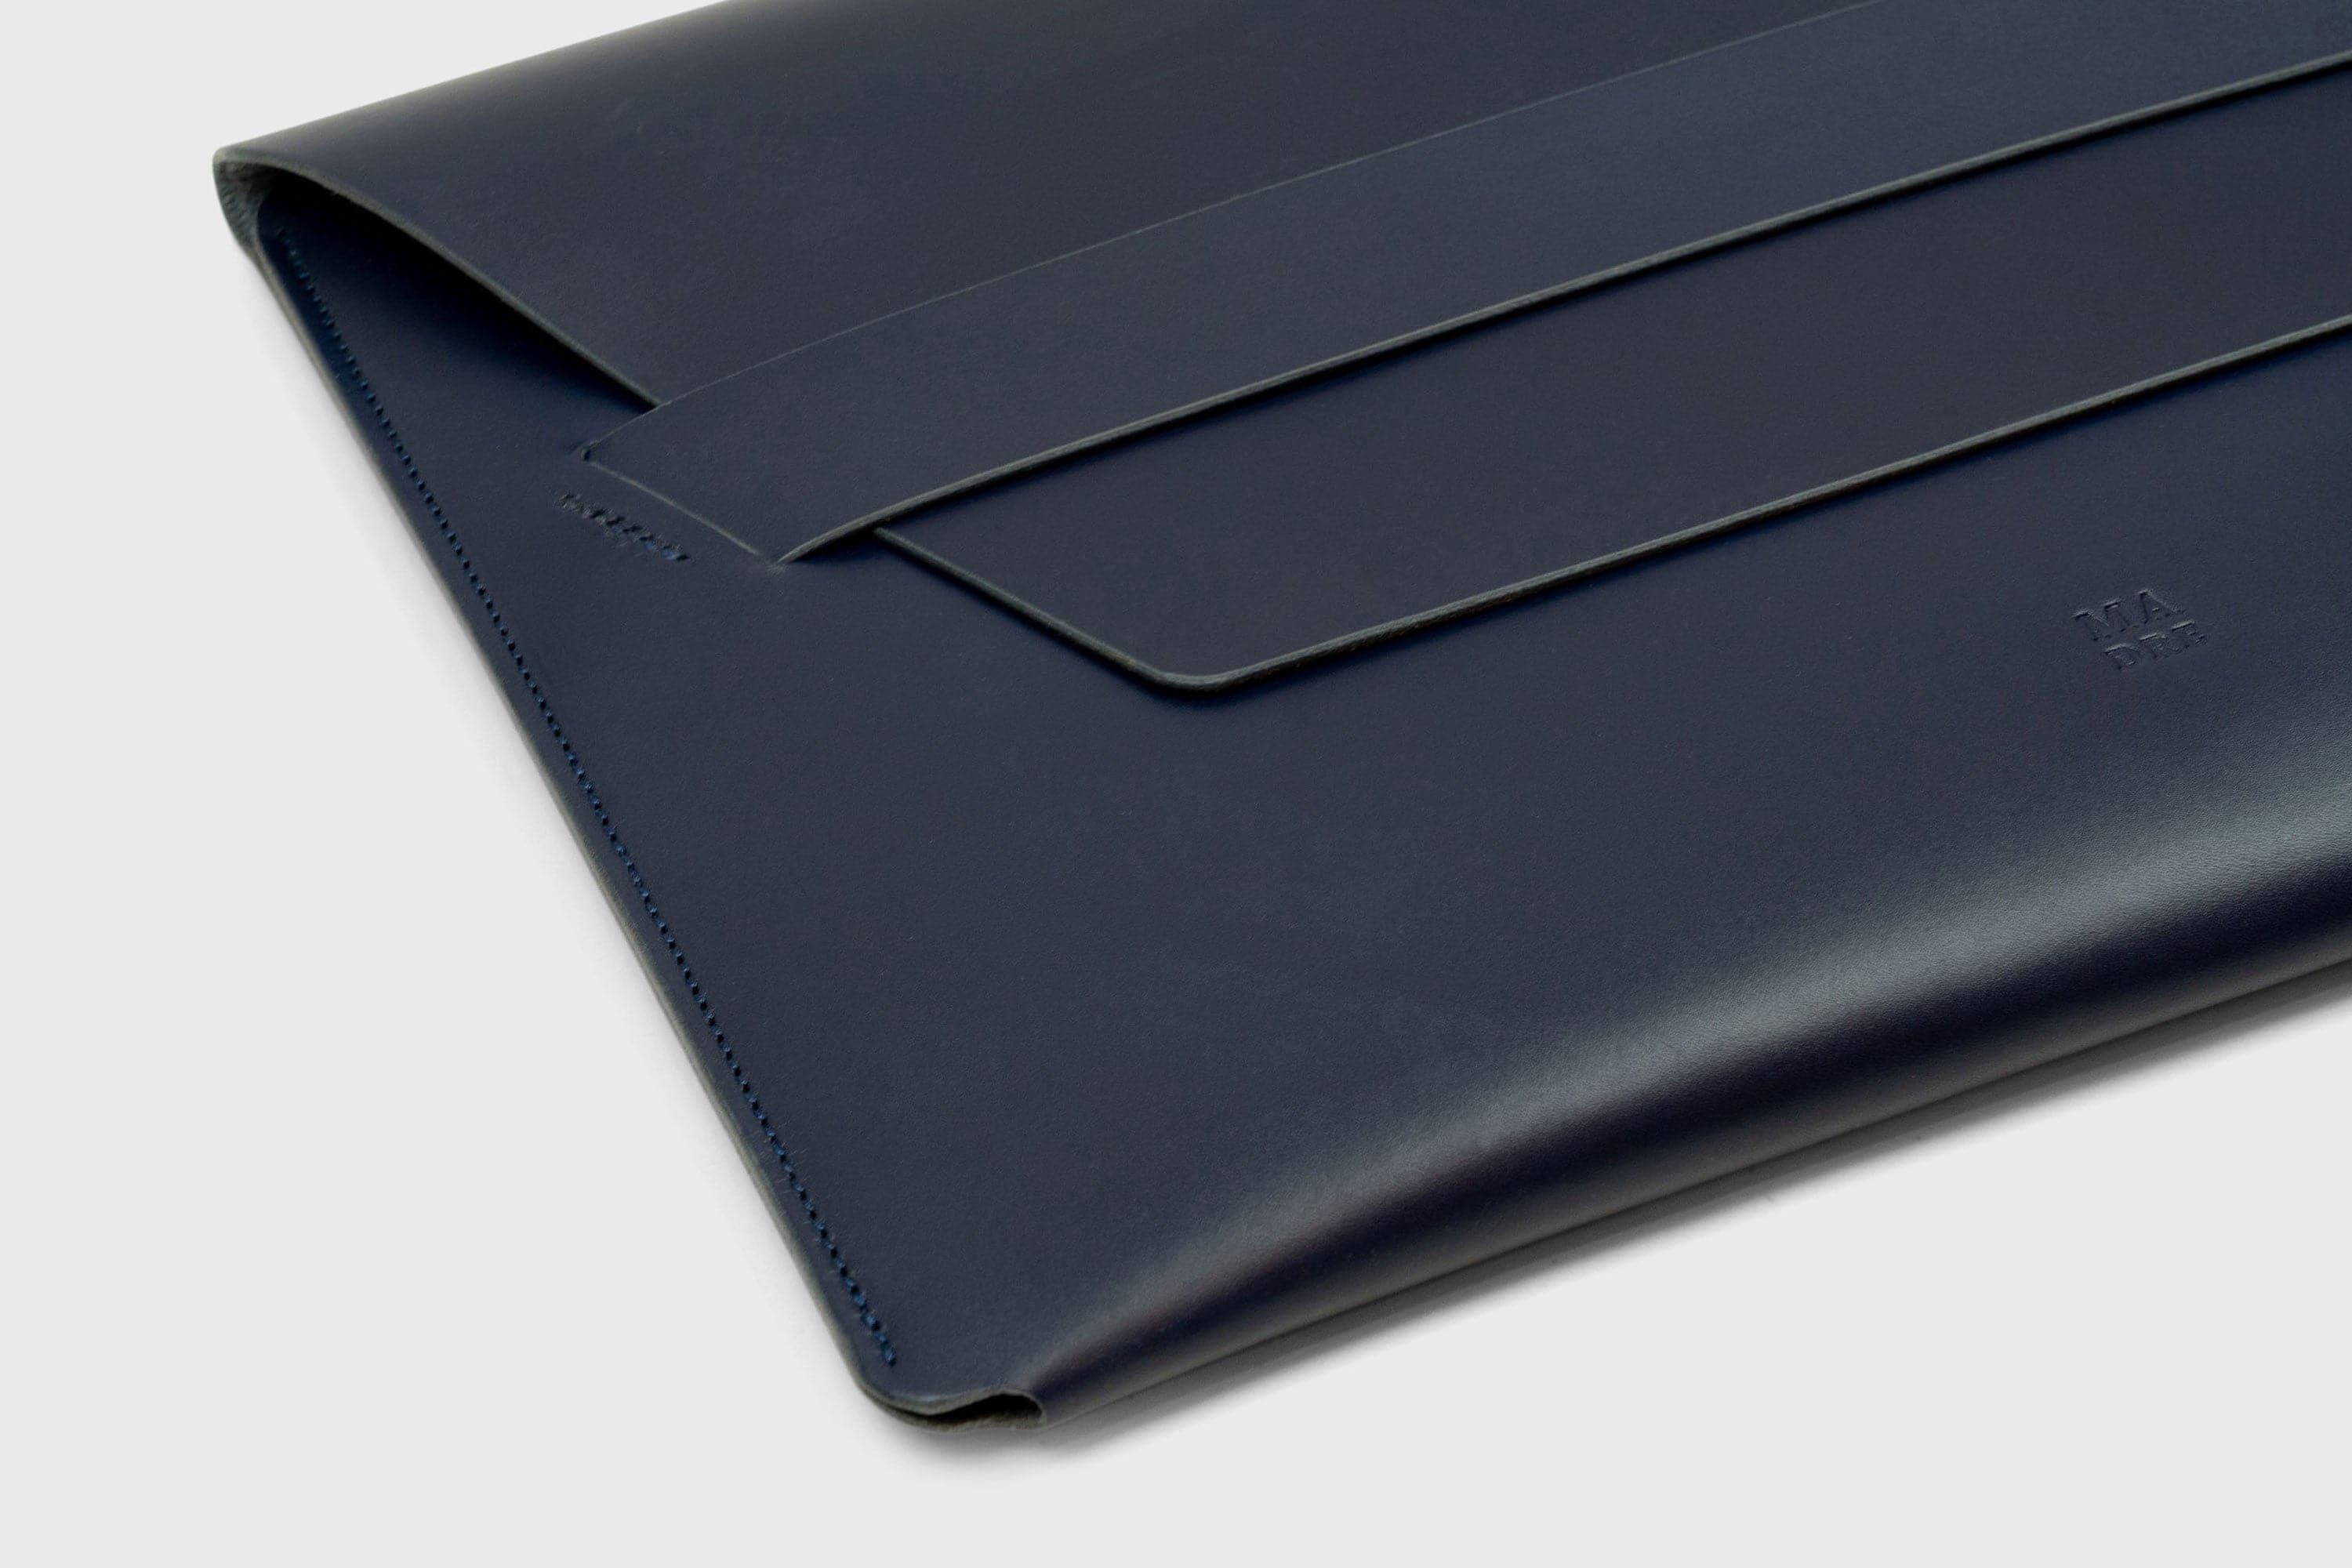 MacBook Pro 14 Inch Leather Sleeve Dark Marine Blue Color Sustainable Handmade and Designed By Manuel Dreesmann Atelier Madre Barcelona Spain